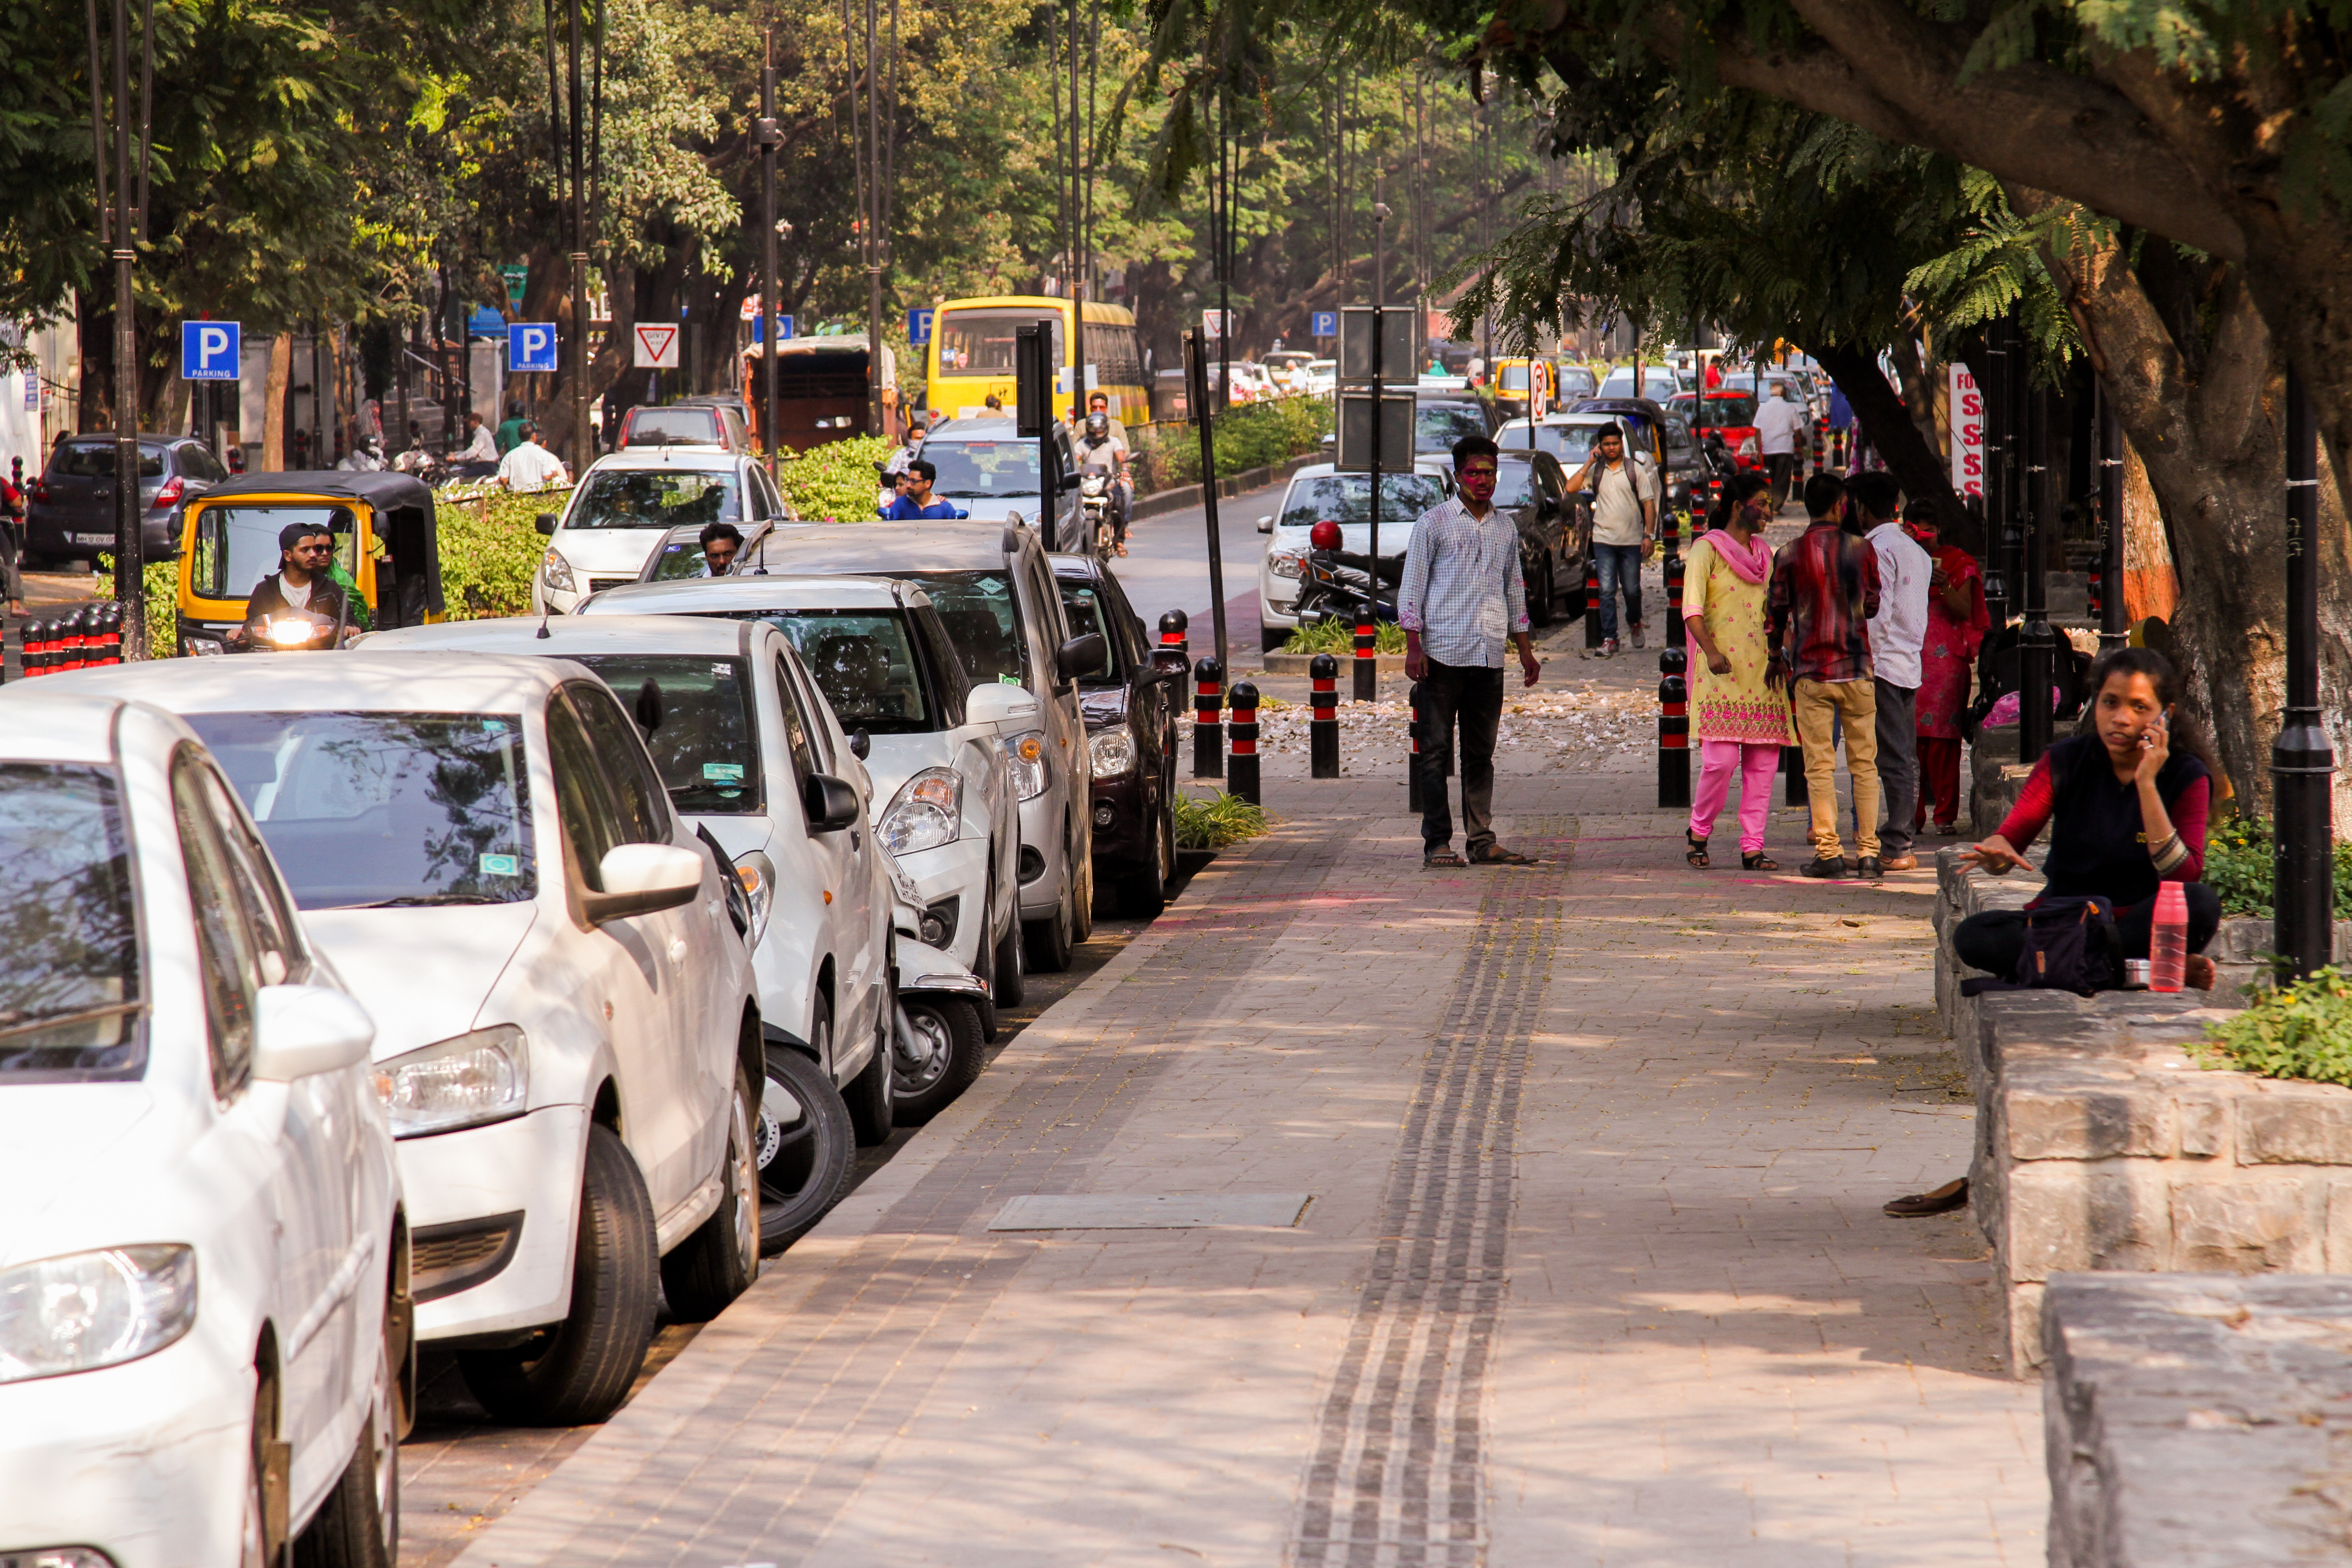 DP Road, Aundh is an example of street design that includes clear parking spots